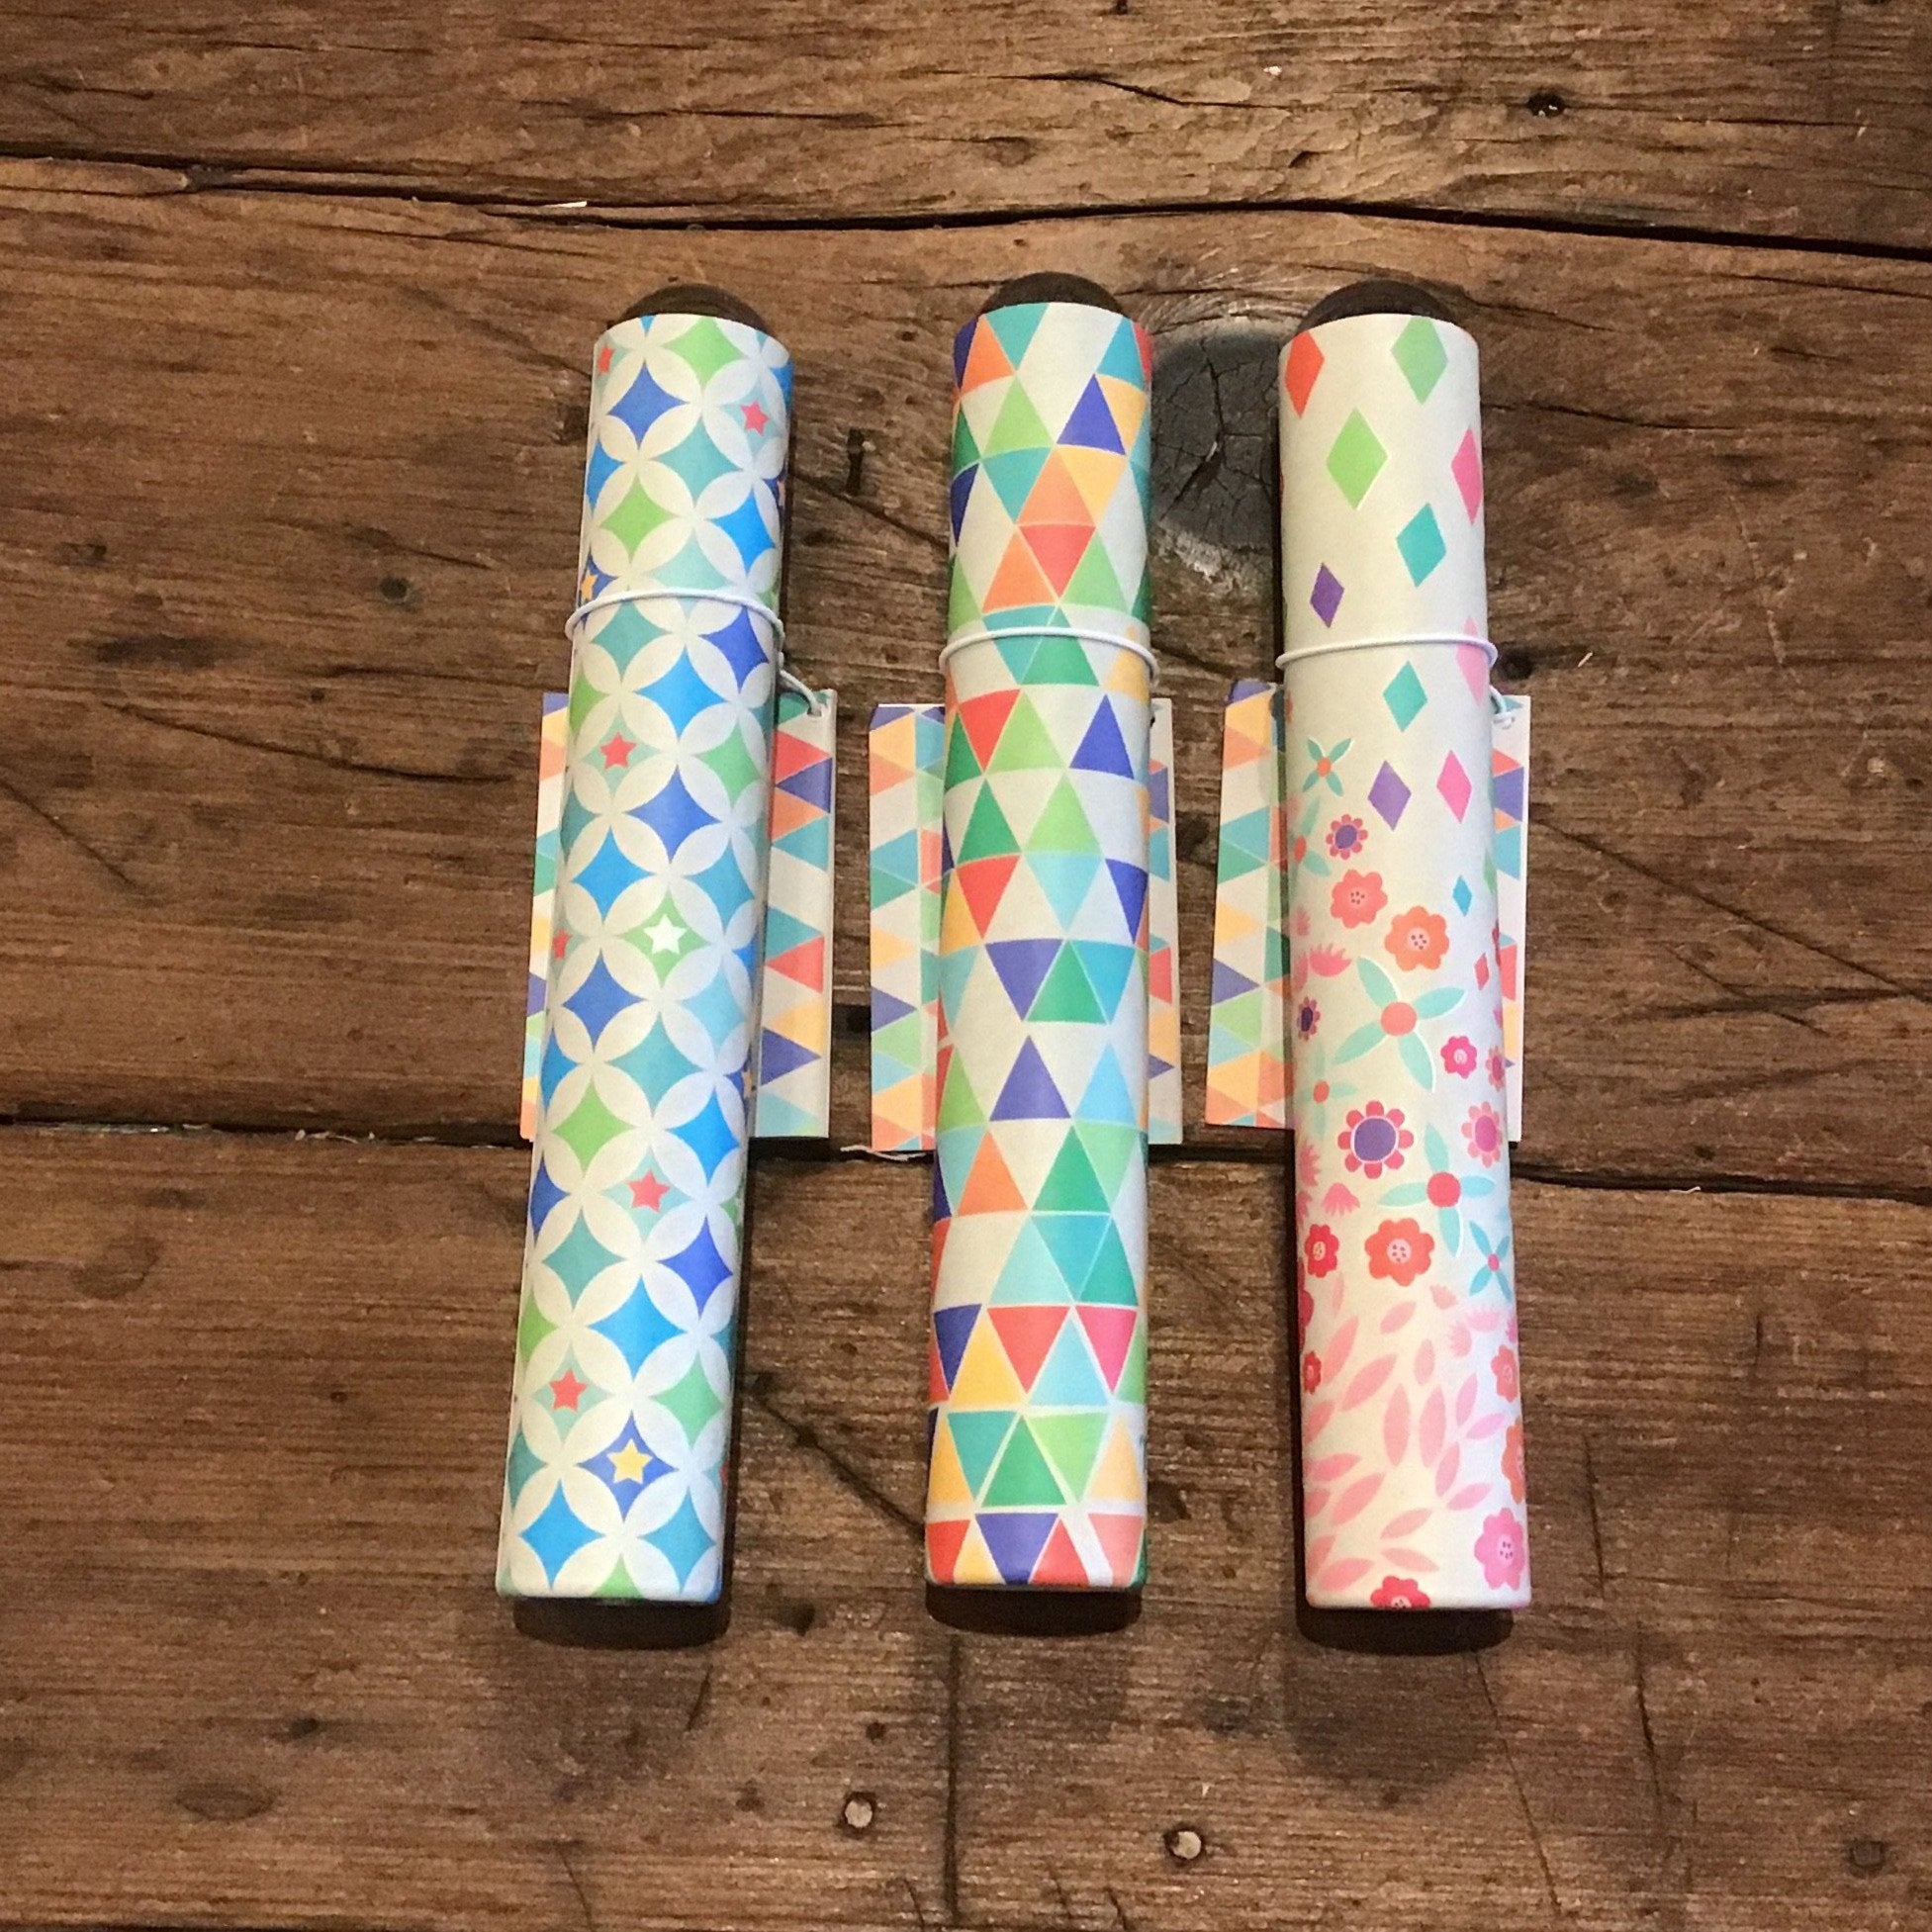 the three tubes in a row on wooden background